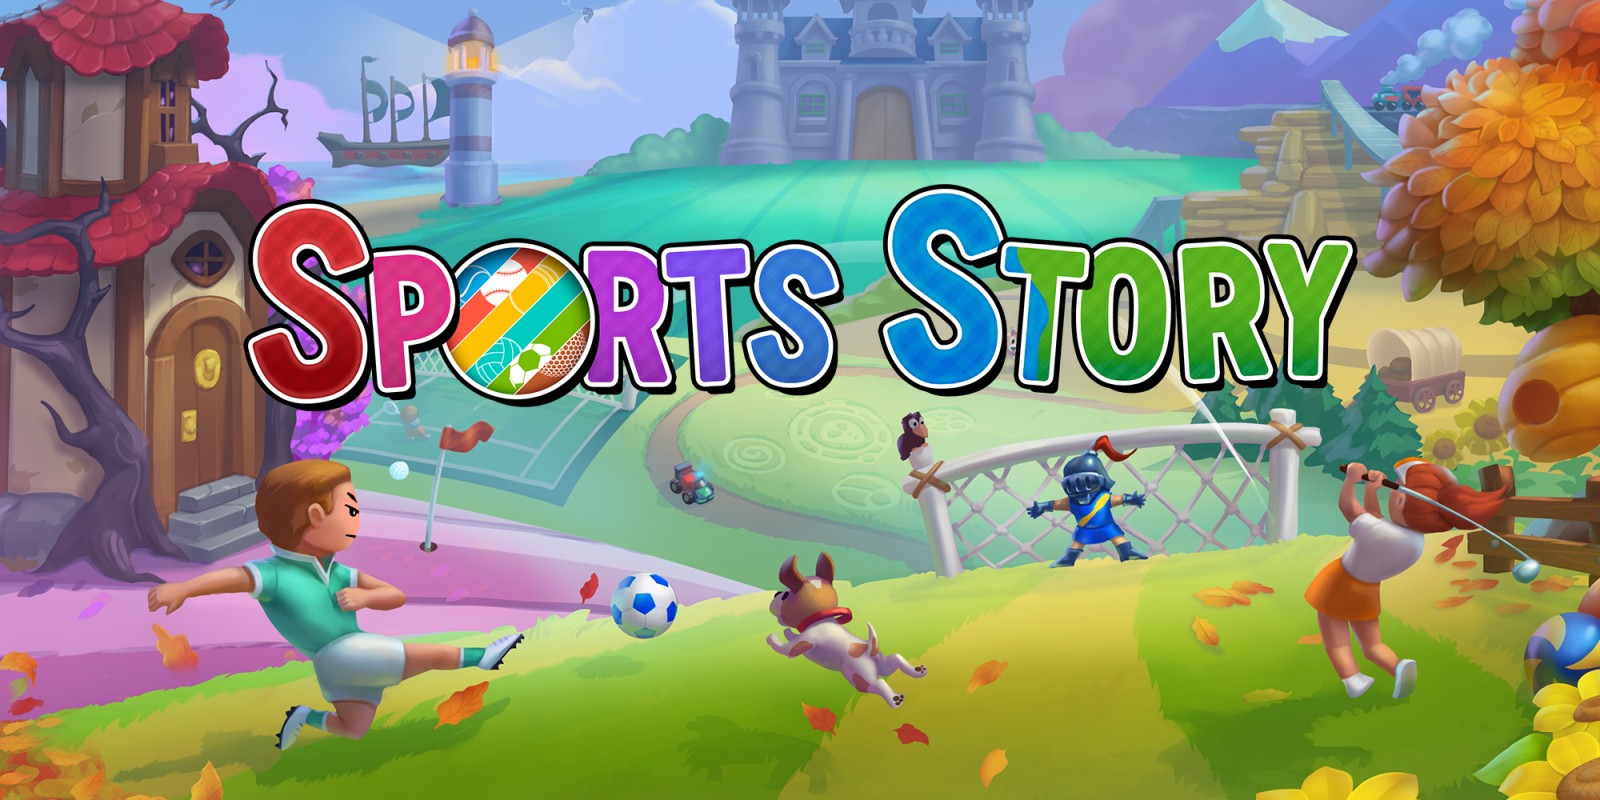 sports story switch download free